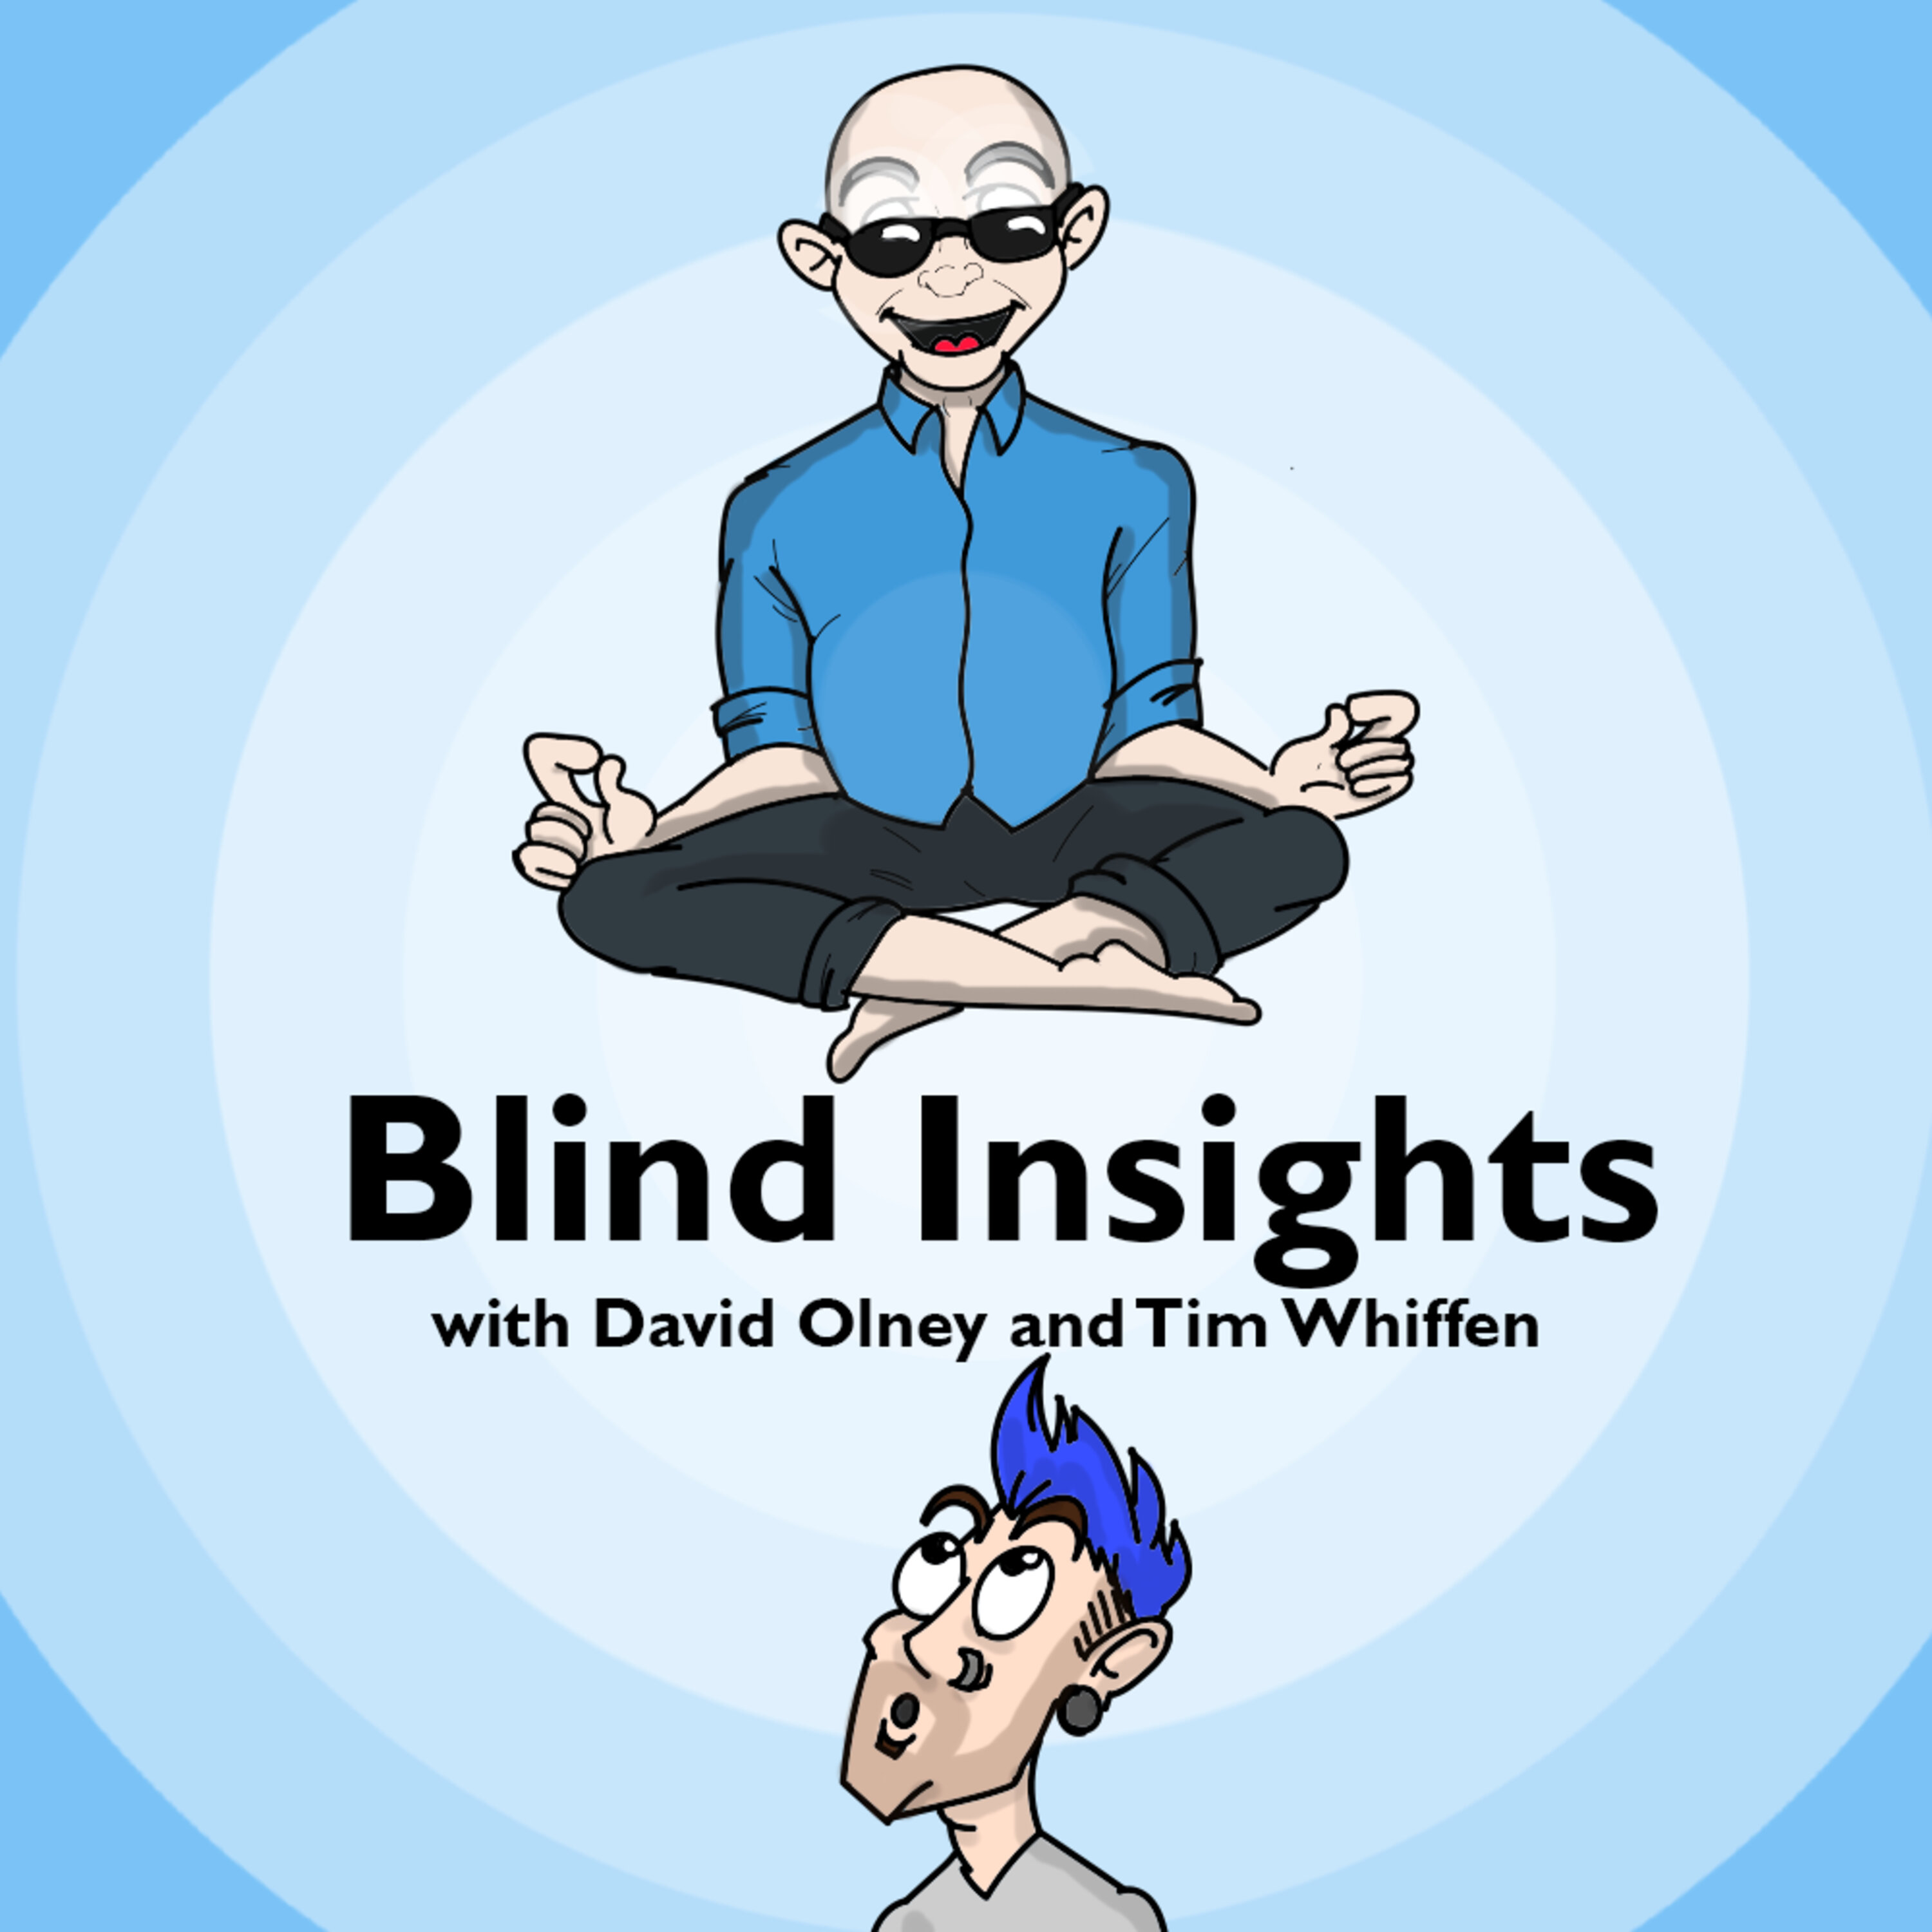 Blind Insights - Universal Basic Incomes and Why Alcohol and TVs Make the World Go Round (Special Guest Sam Burt)